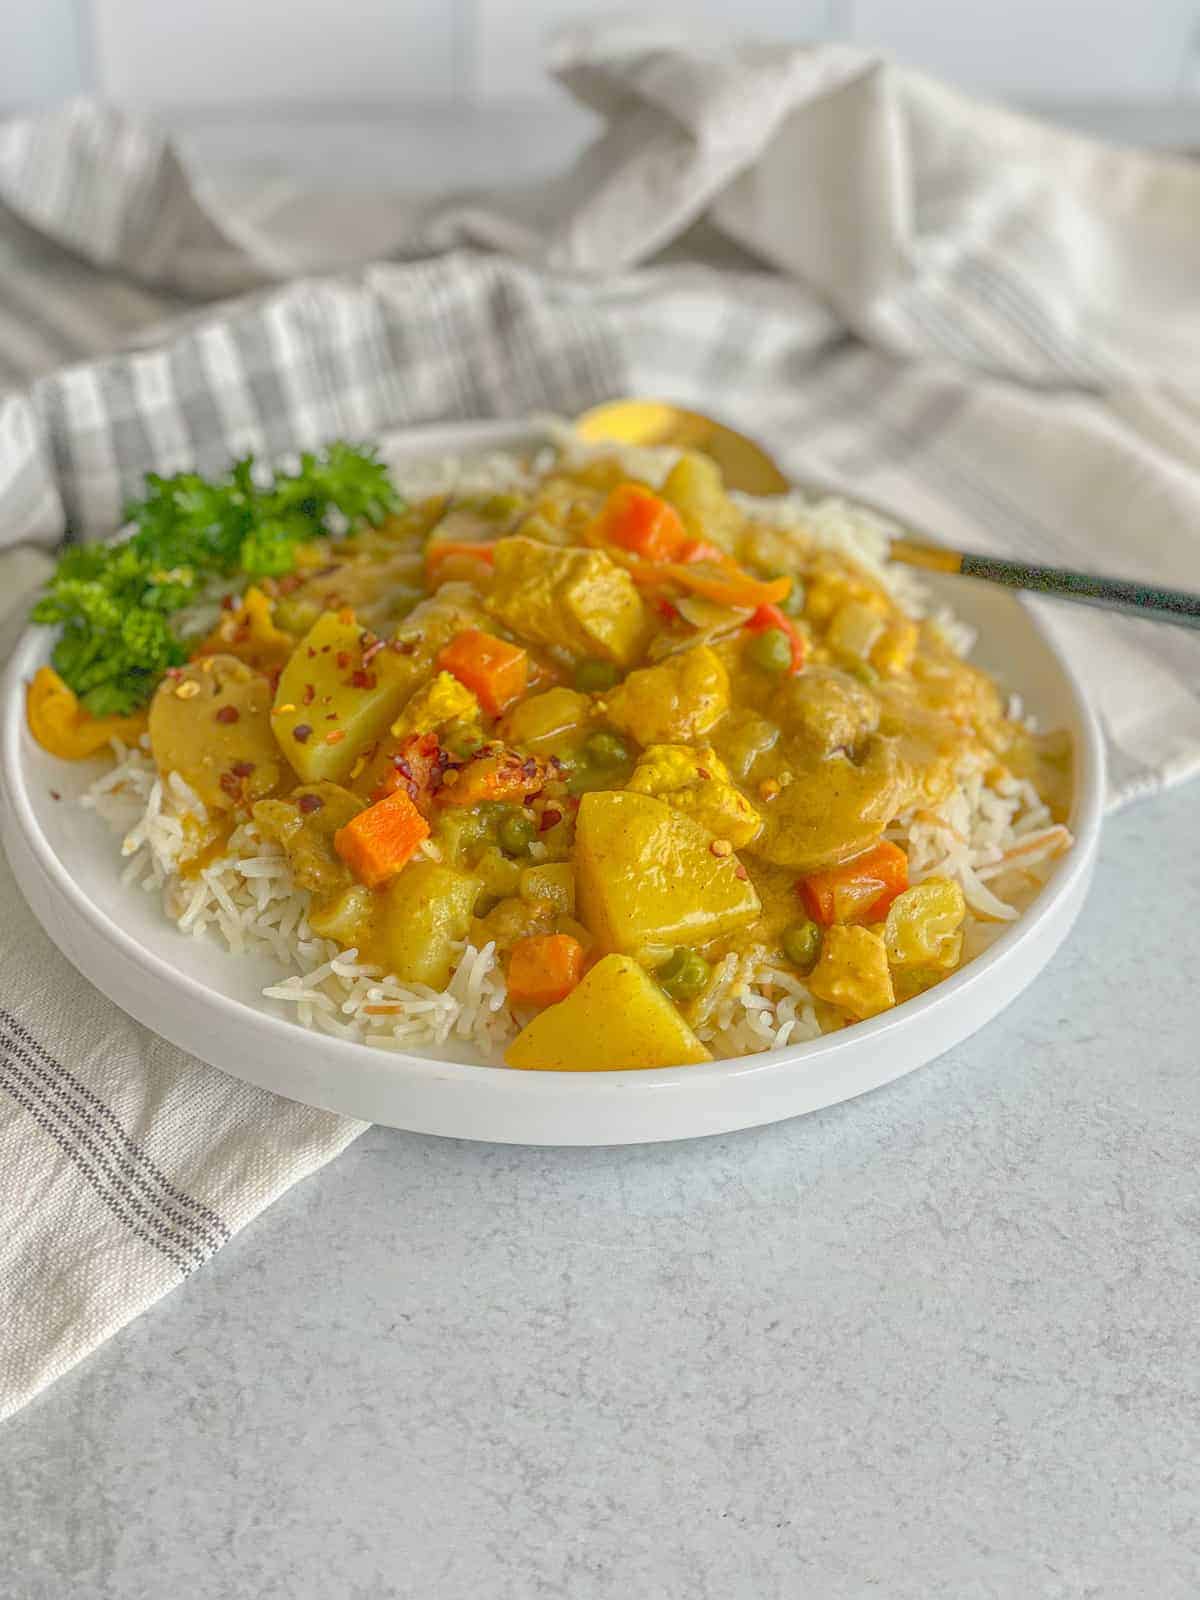 a dish of chicken vegetable curry recipe served on a bed of rice and sprinkled with chili flakes